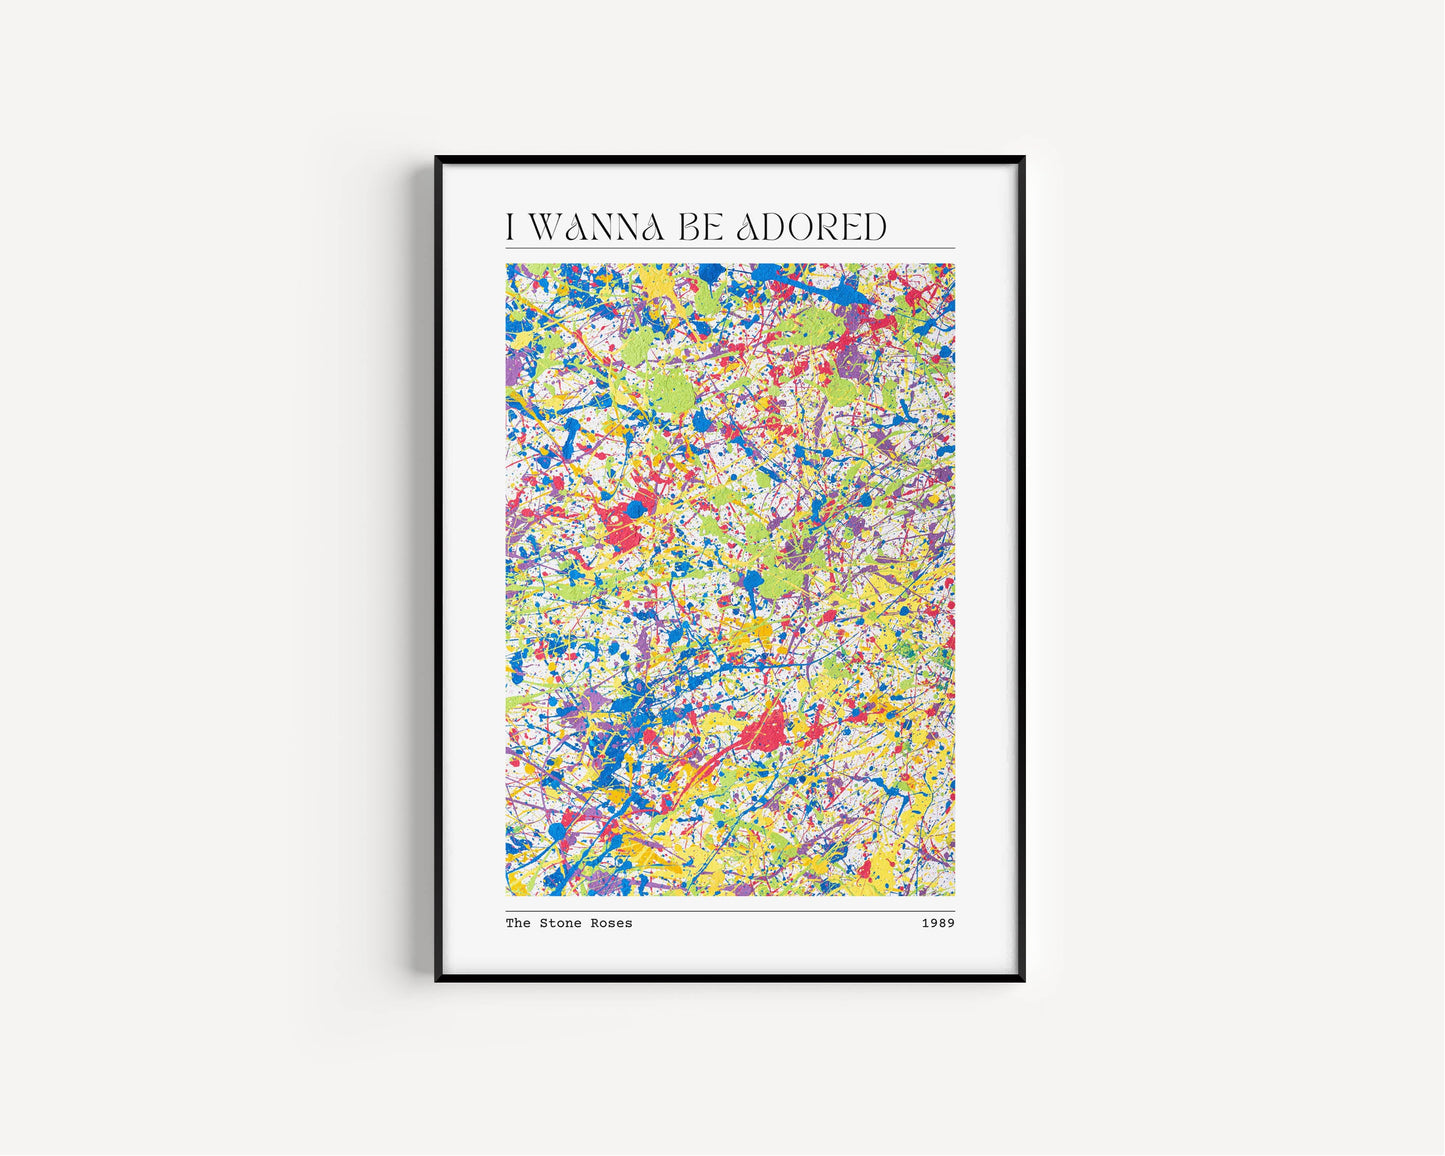 The Stone Roses Inspired Prints, Fools Gold, Sally Cinnamon, Stone Roses Songs, Stone Roses Poster, Indie Music Art Prints, Rock Prints